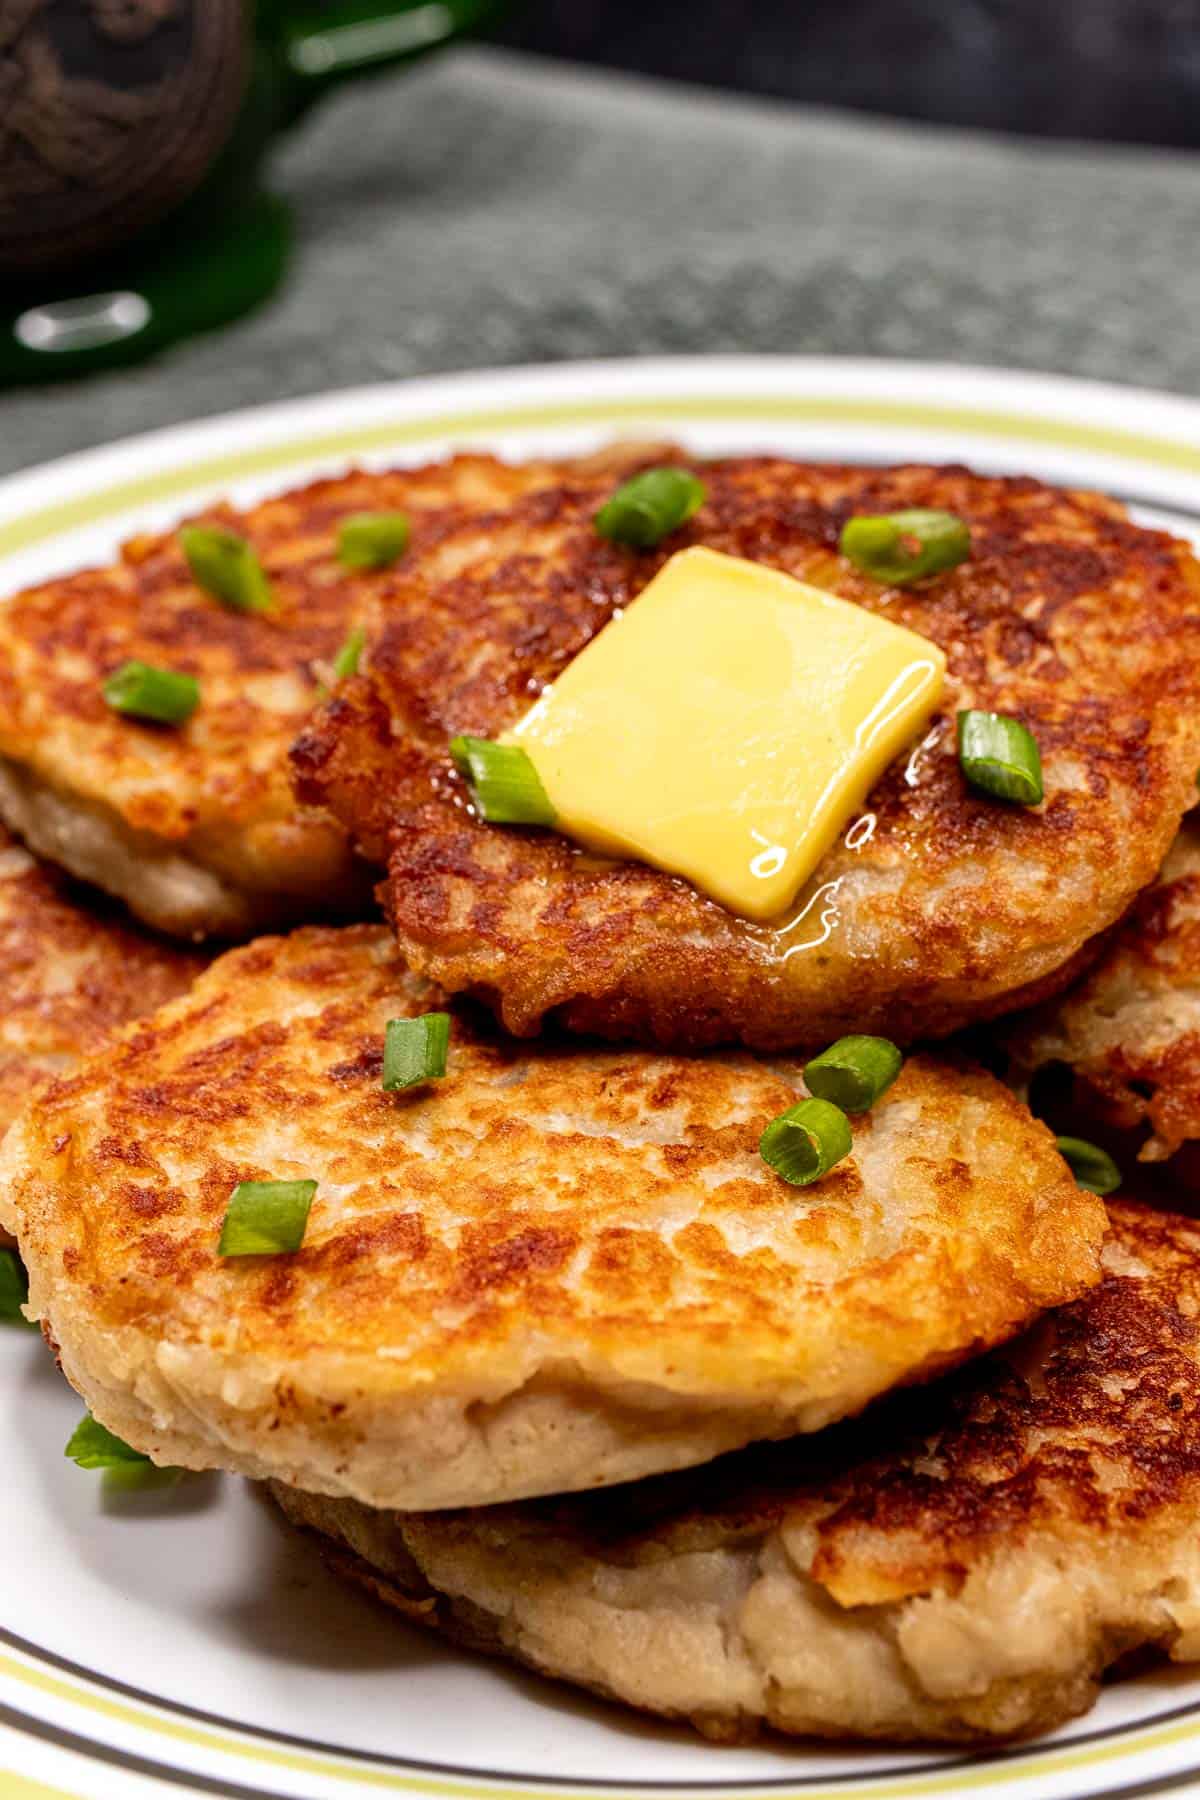 Plate of Irish potato pancakes topped with butter and chopped spring onion.